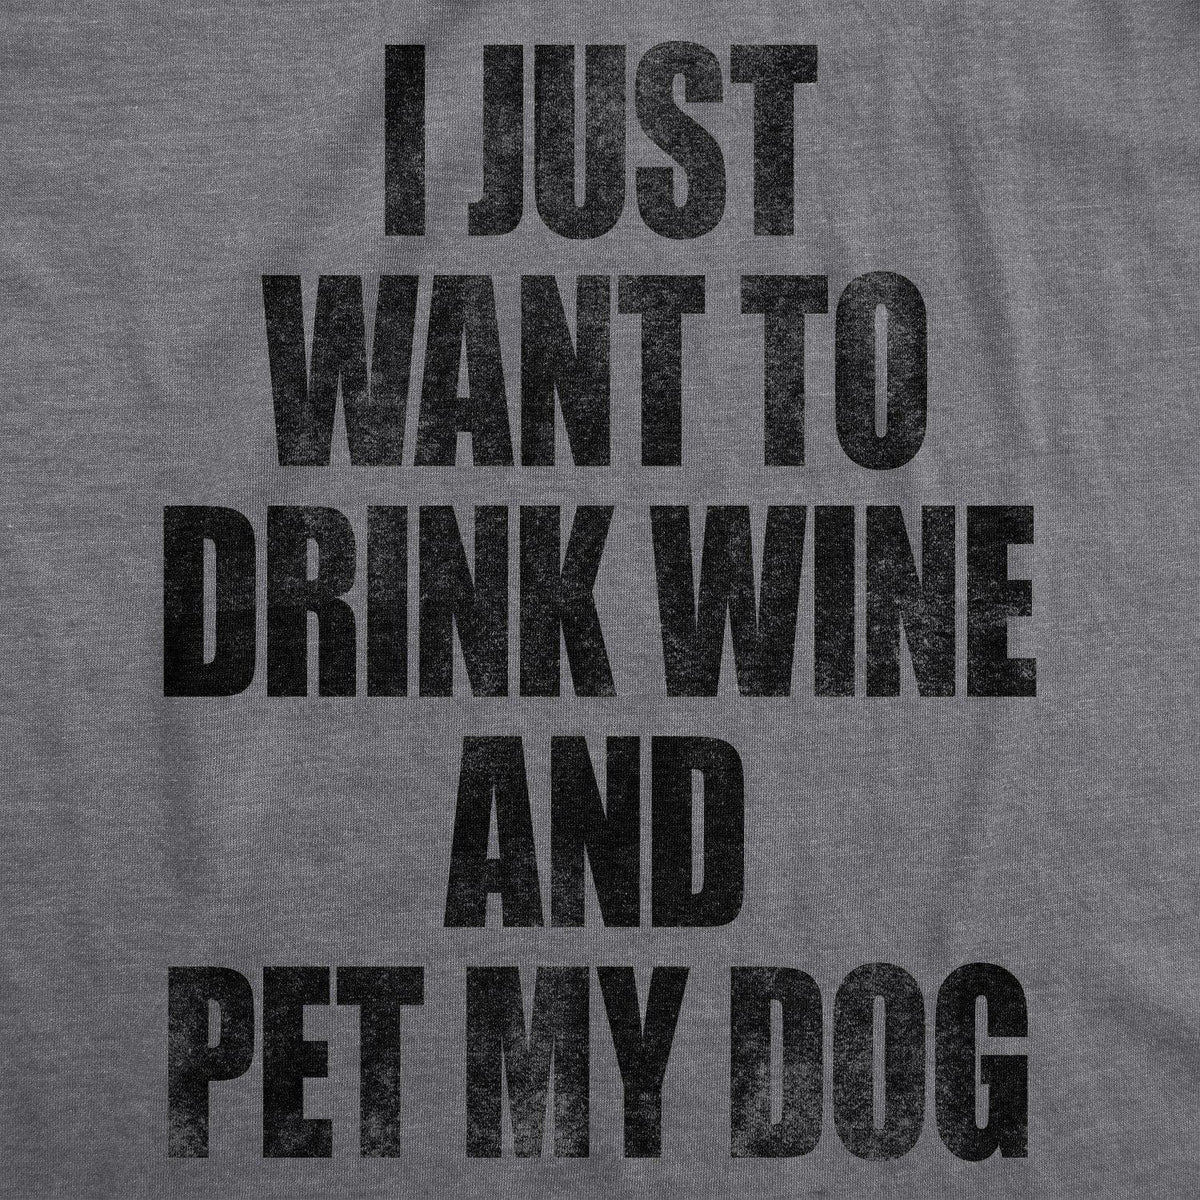 I Just Want To Drink Wine and Pet My Dog Men&#39;s Tshirt  -  Crazy Dog T-Shirts